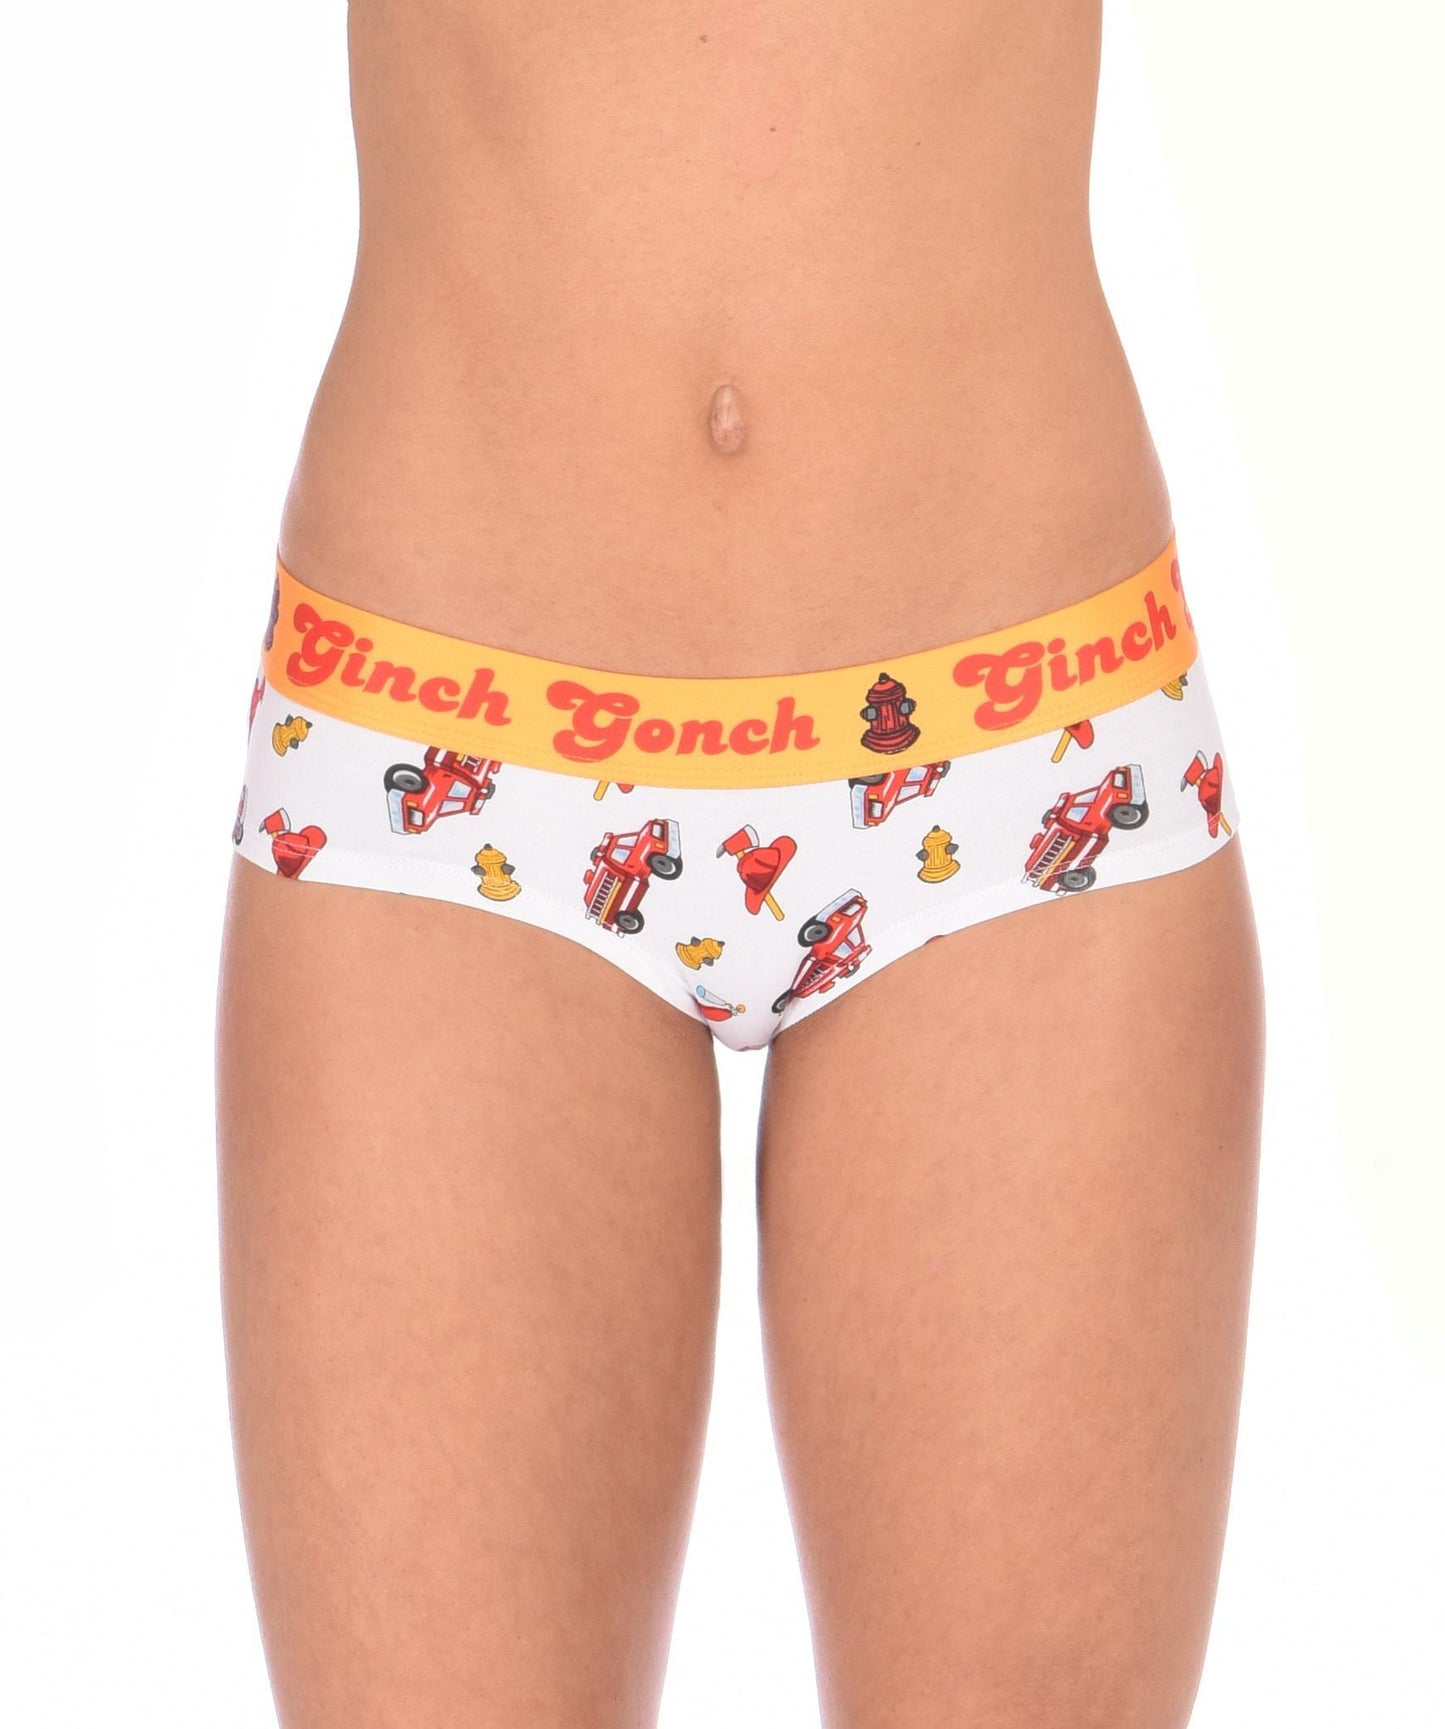 Ginch Gonch GG Fire Fighters boy cut Brief womens underwear white fabric with fire engines hats and hydrants, yellow trim and yellow printed waistband front 